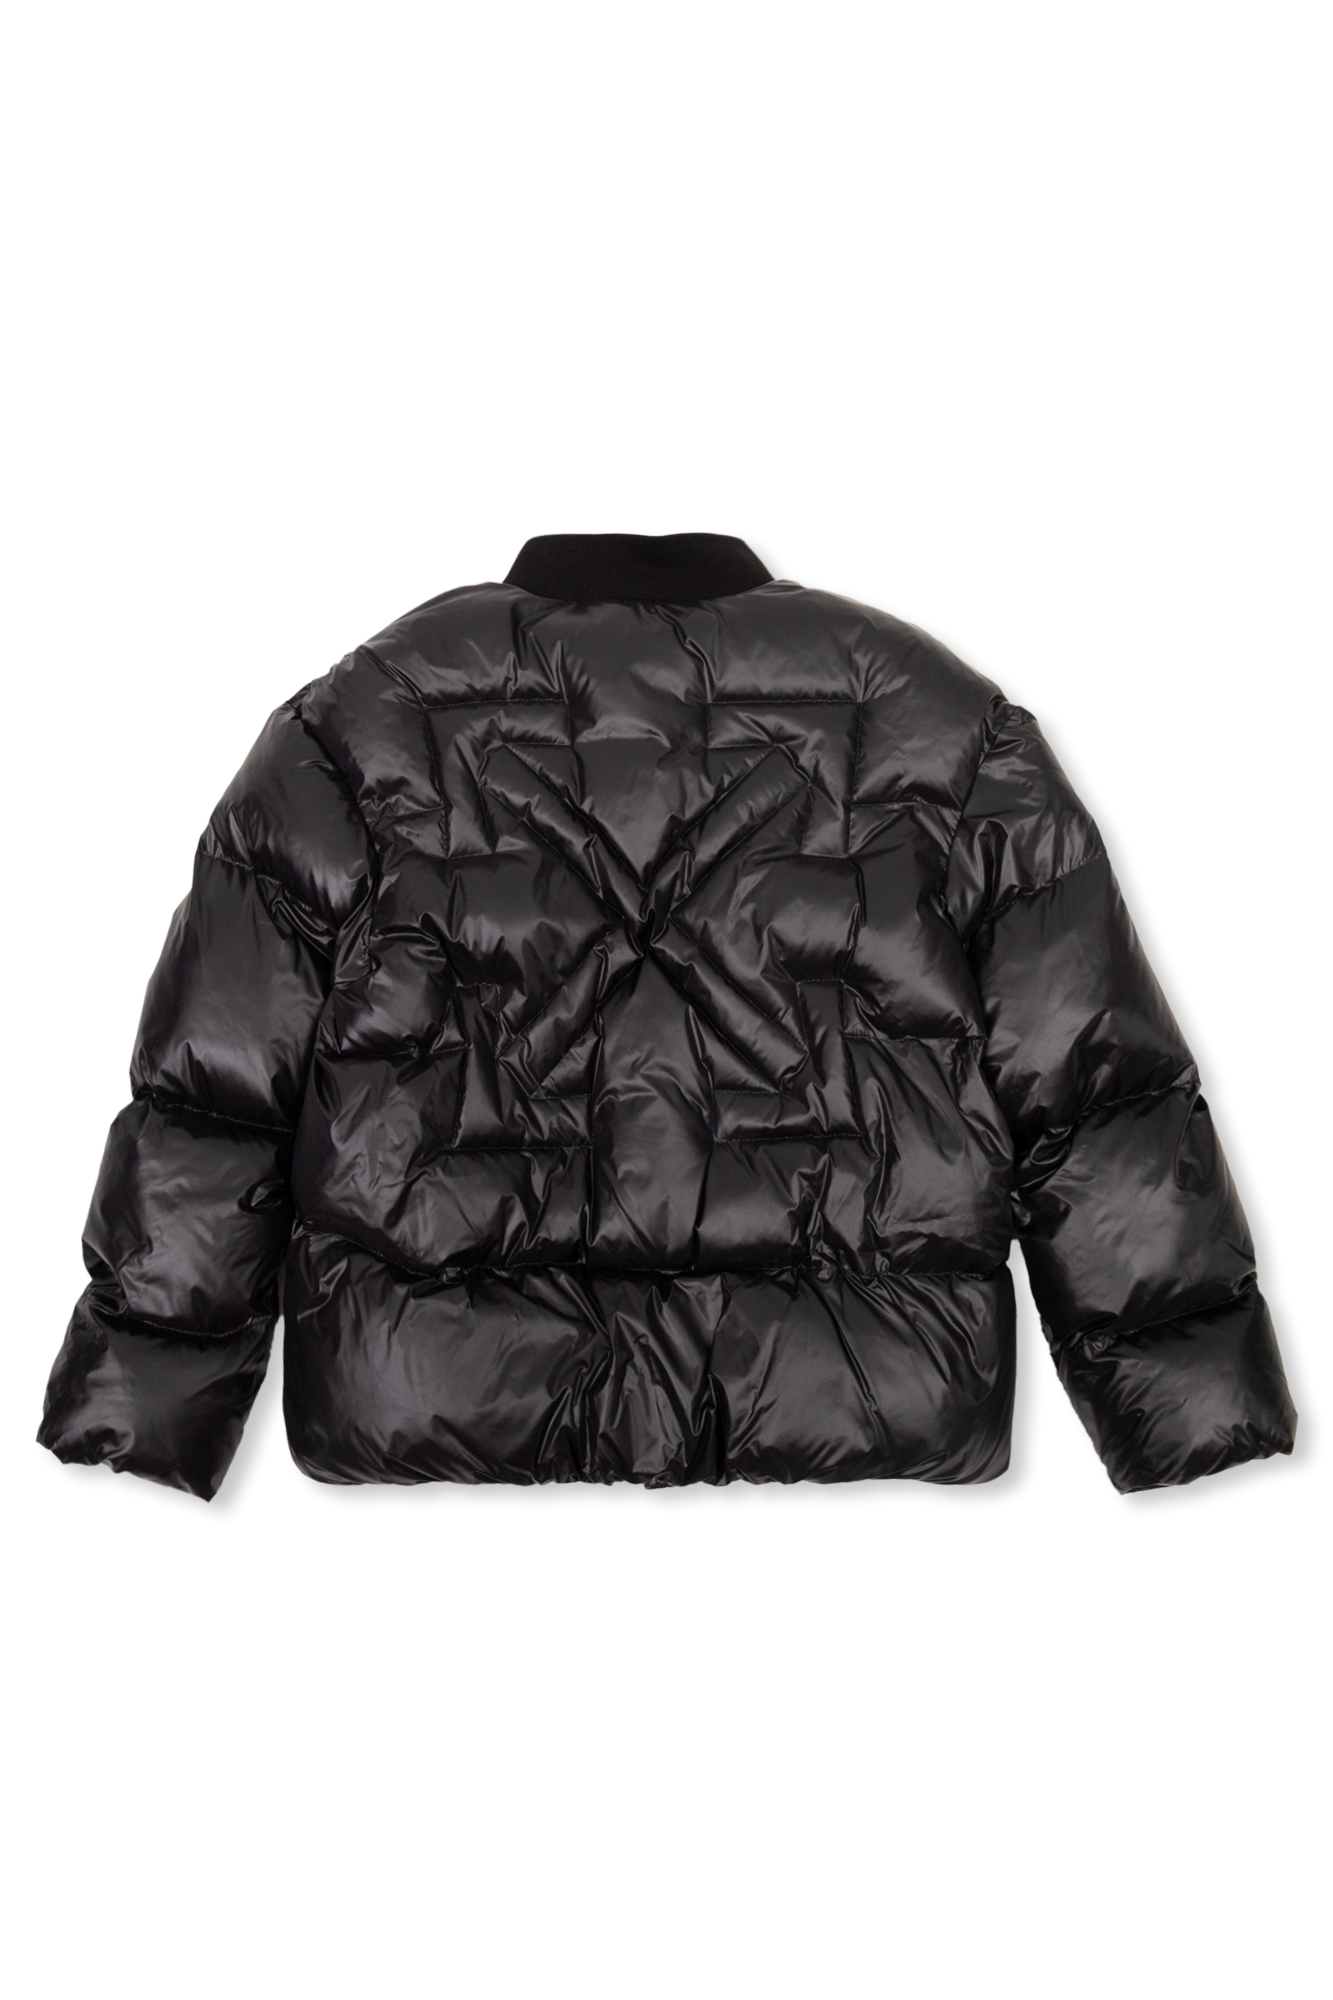 Off-White Kids Insulated Gar jacket with logo